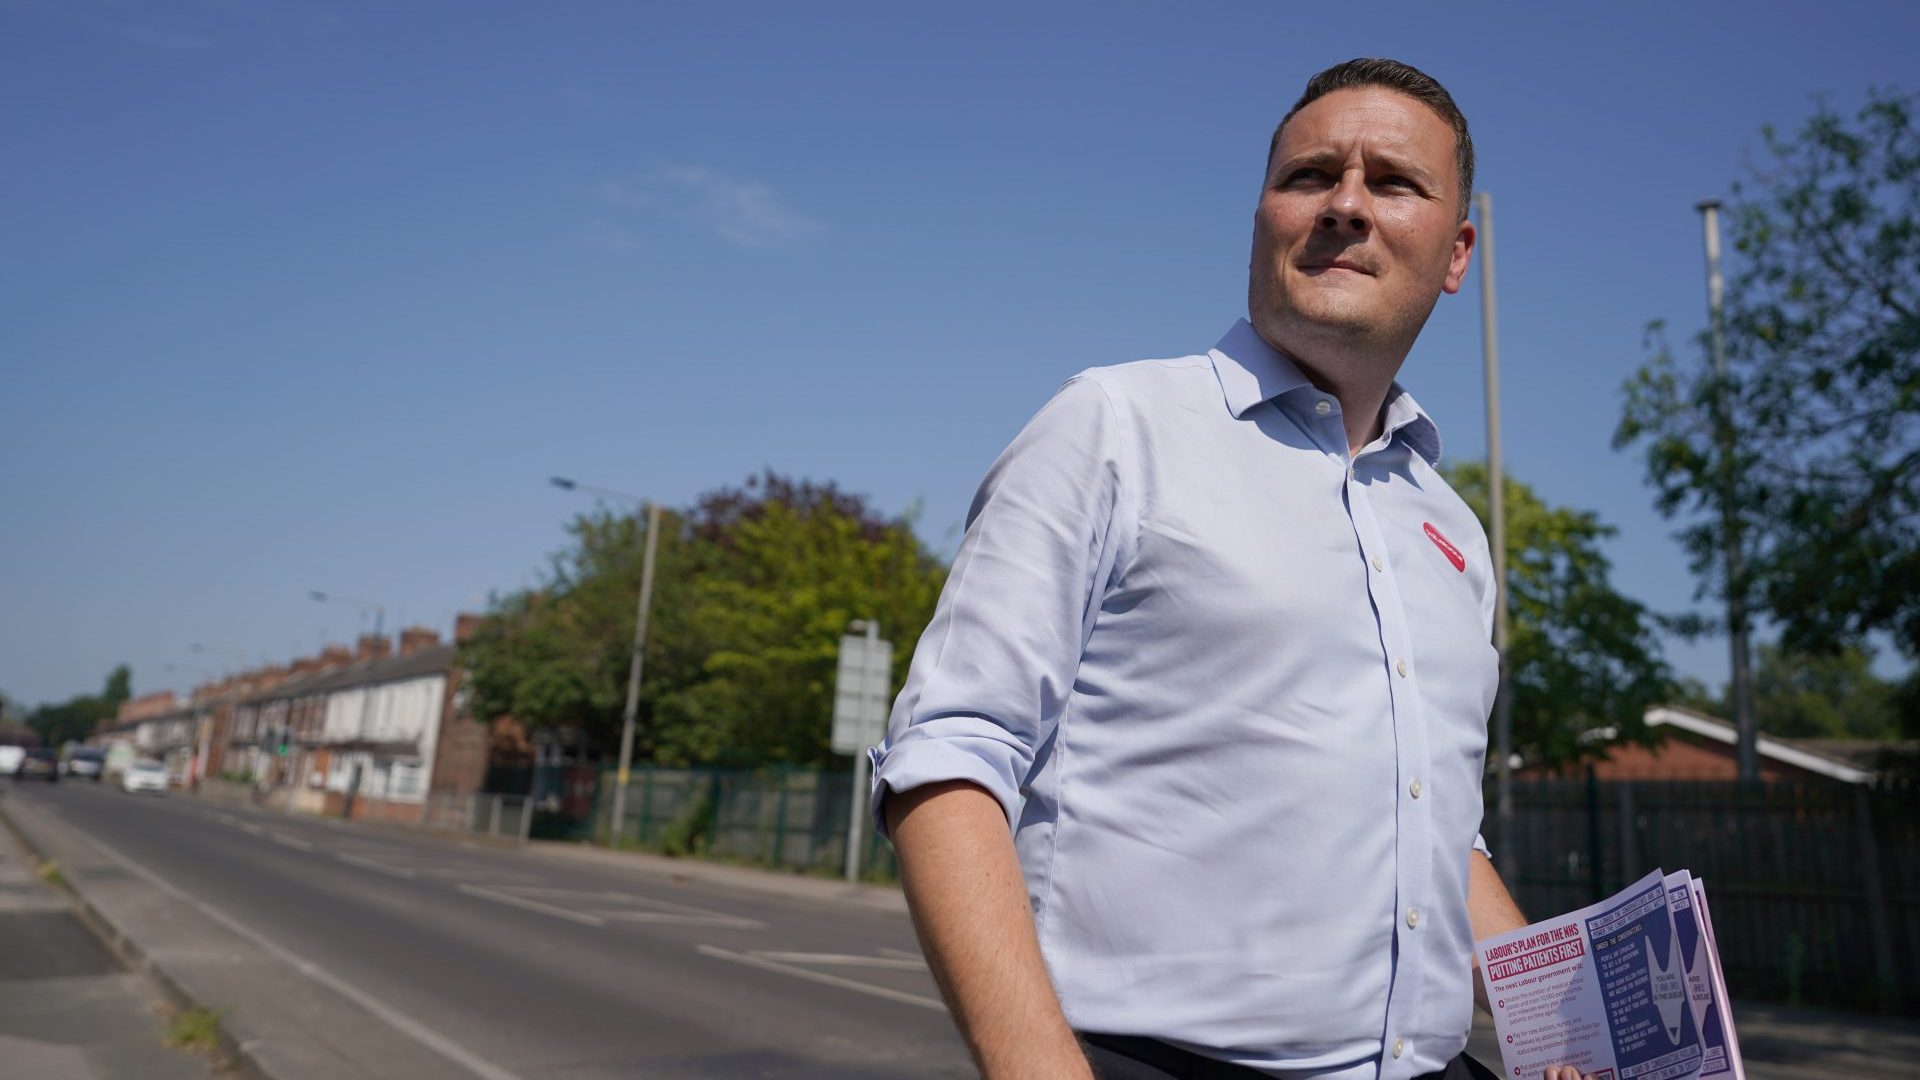 Wes Streeting visits Selby as he canvasses ahead of the by-election on June 12 (Photo by Ian Forsyth/Getty Images)